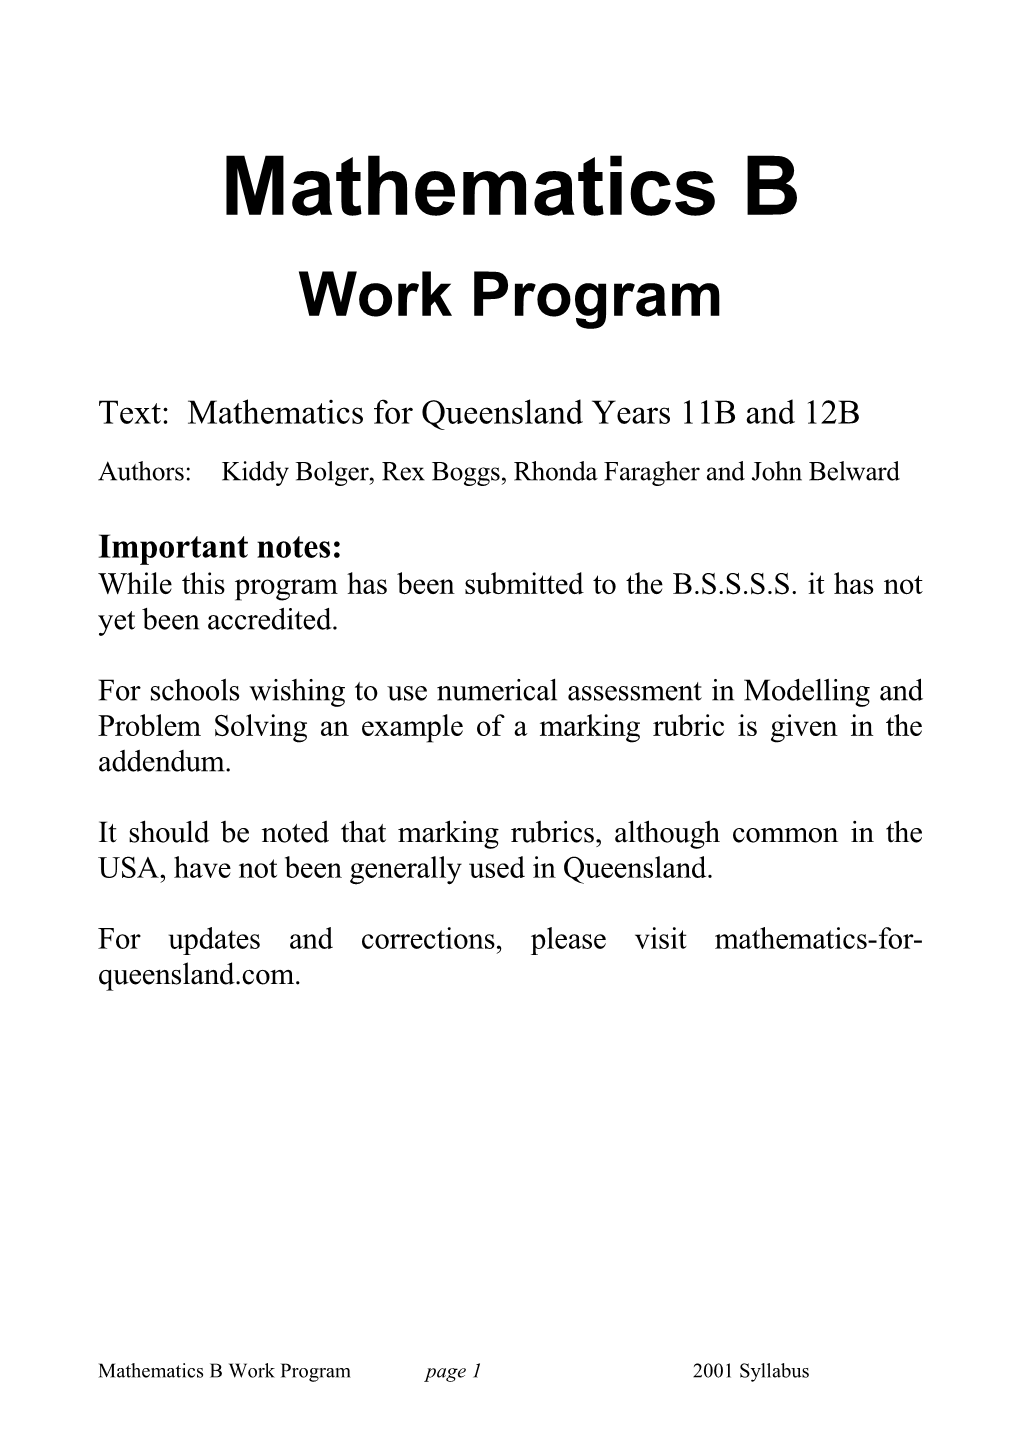 Text: Mathematics for Queensland Years 11B and 12B